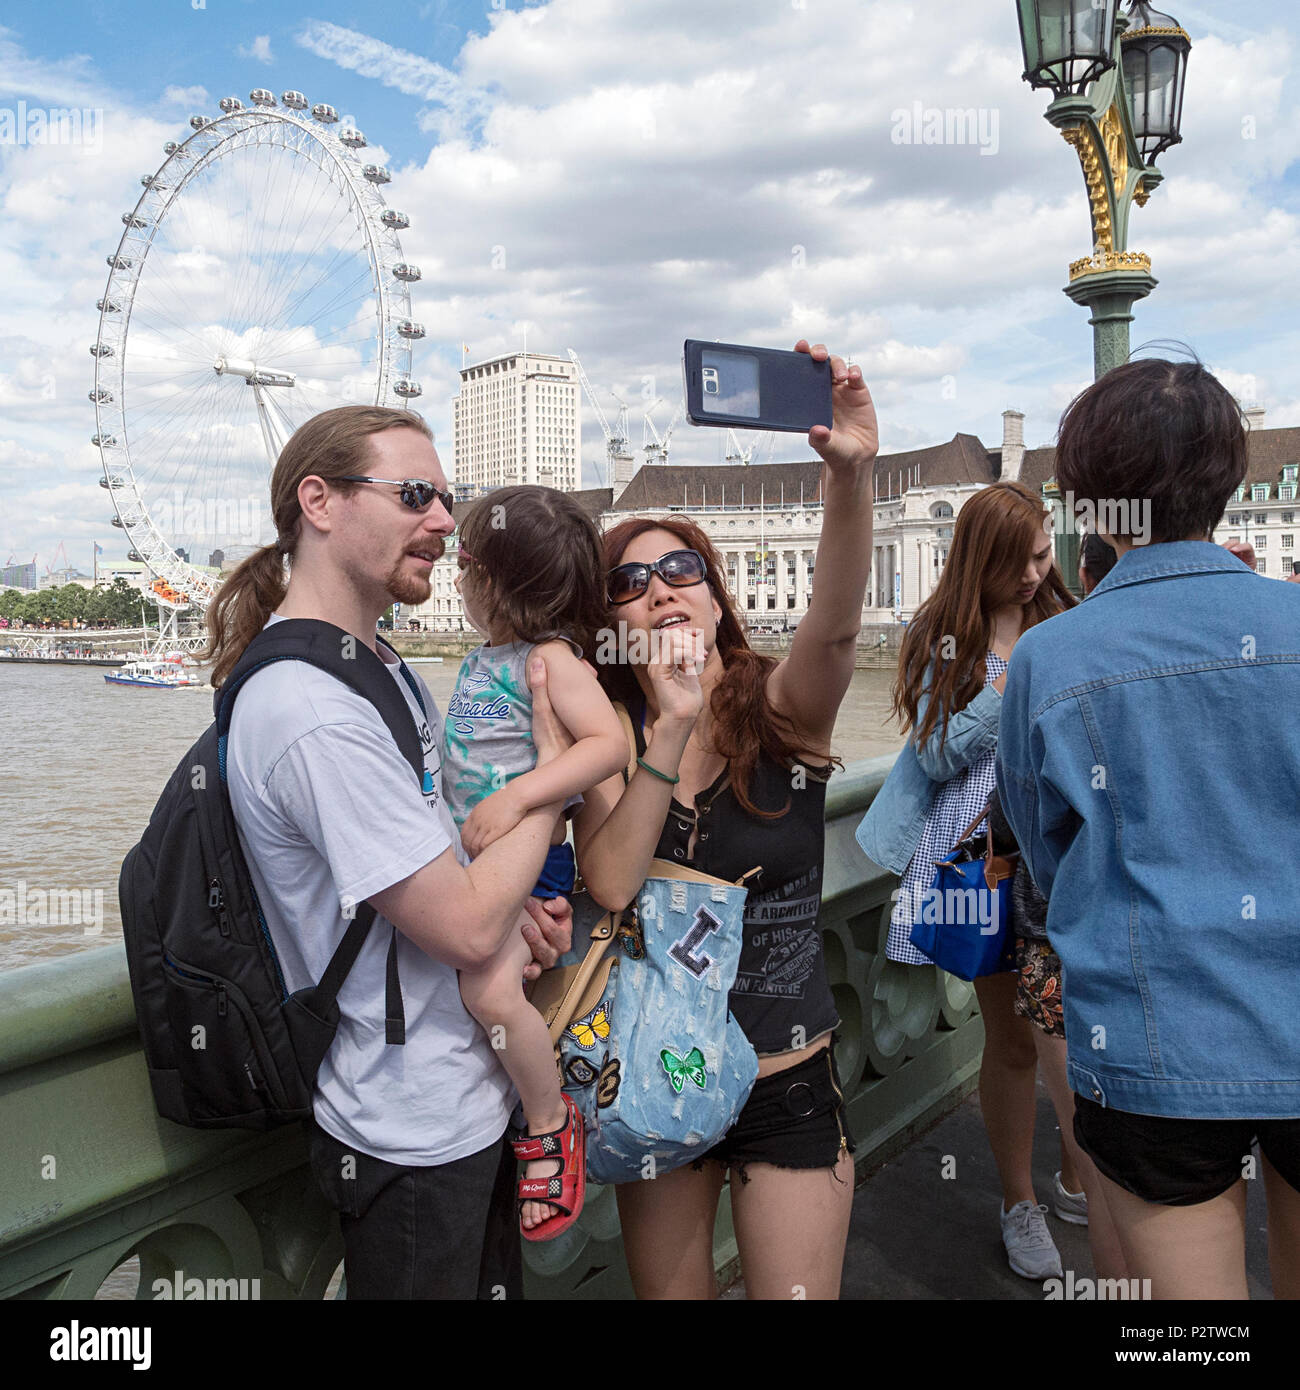 London, UK: July 25, 2016: Tourists take a photograph on Westminster Bridge with a view of Thames River behind them. Stock Photo